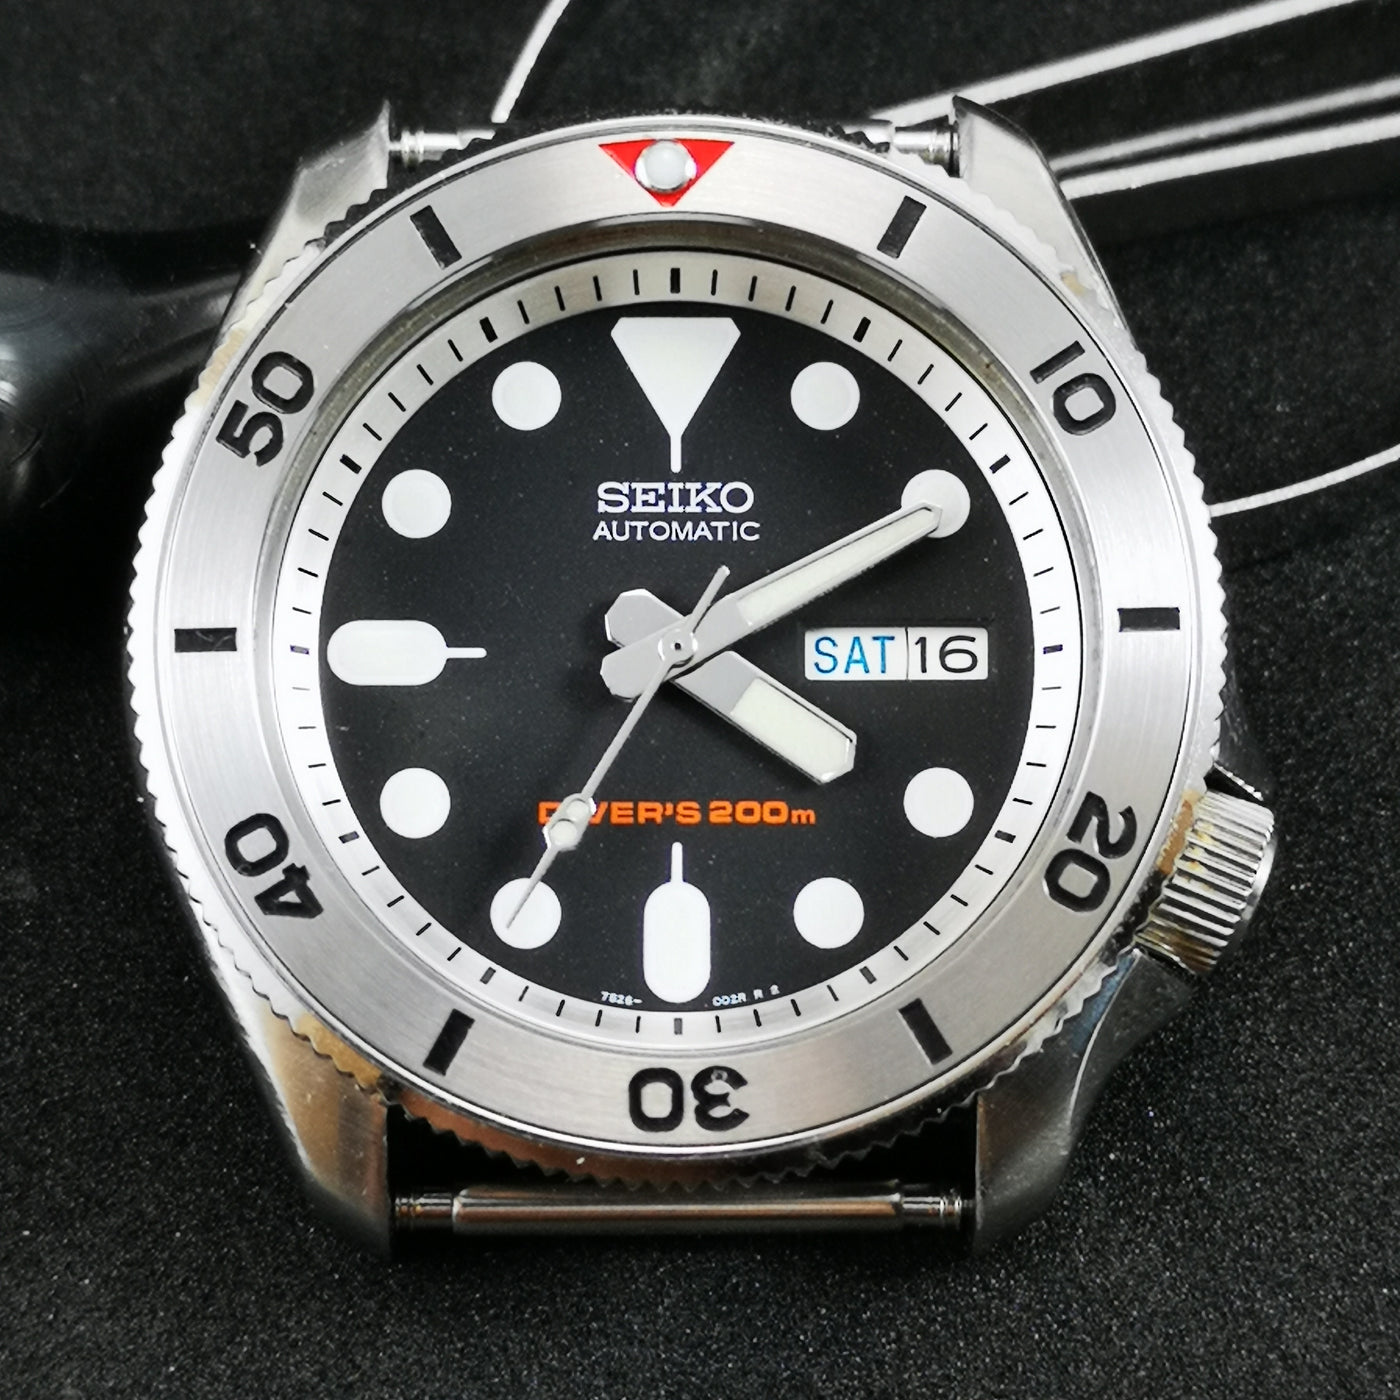 Red Seamaster Style - SKX007 Stainless Bezel Insert - Watch&Style